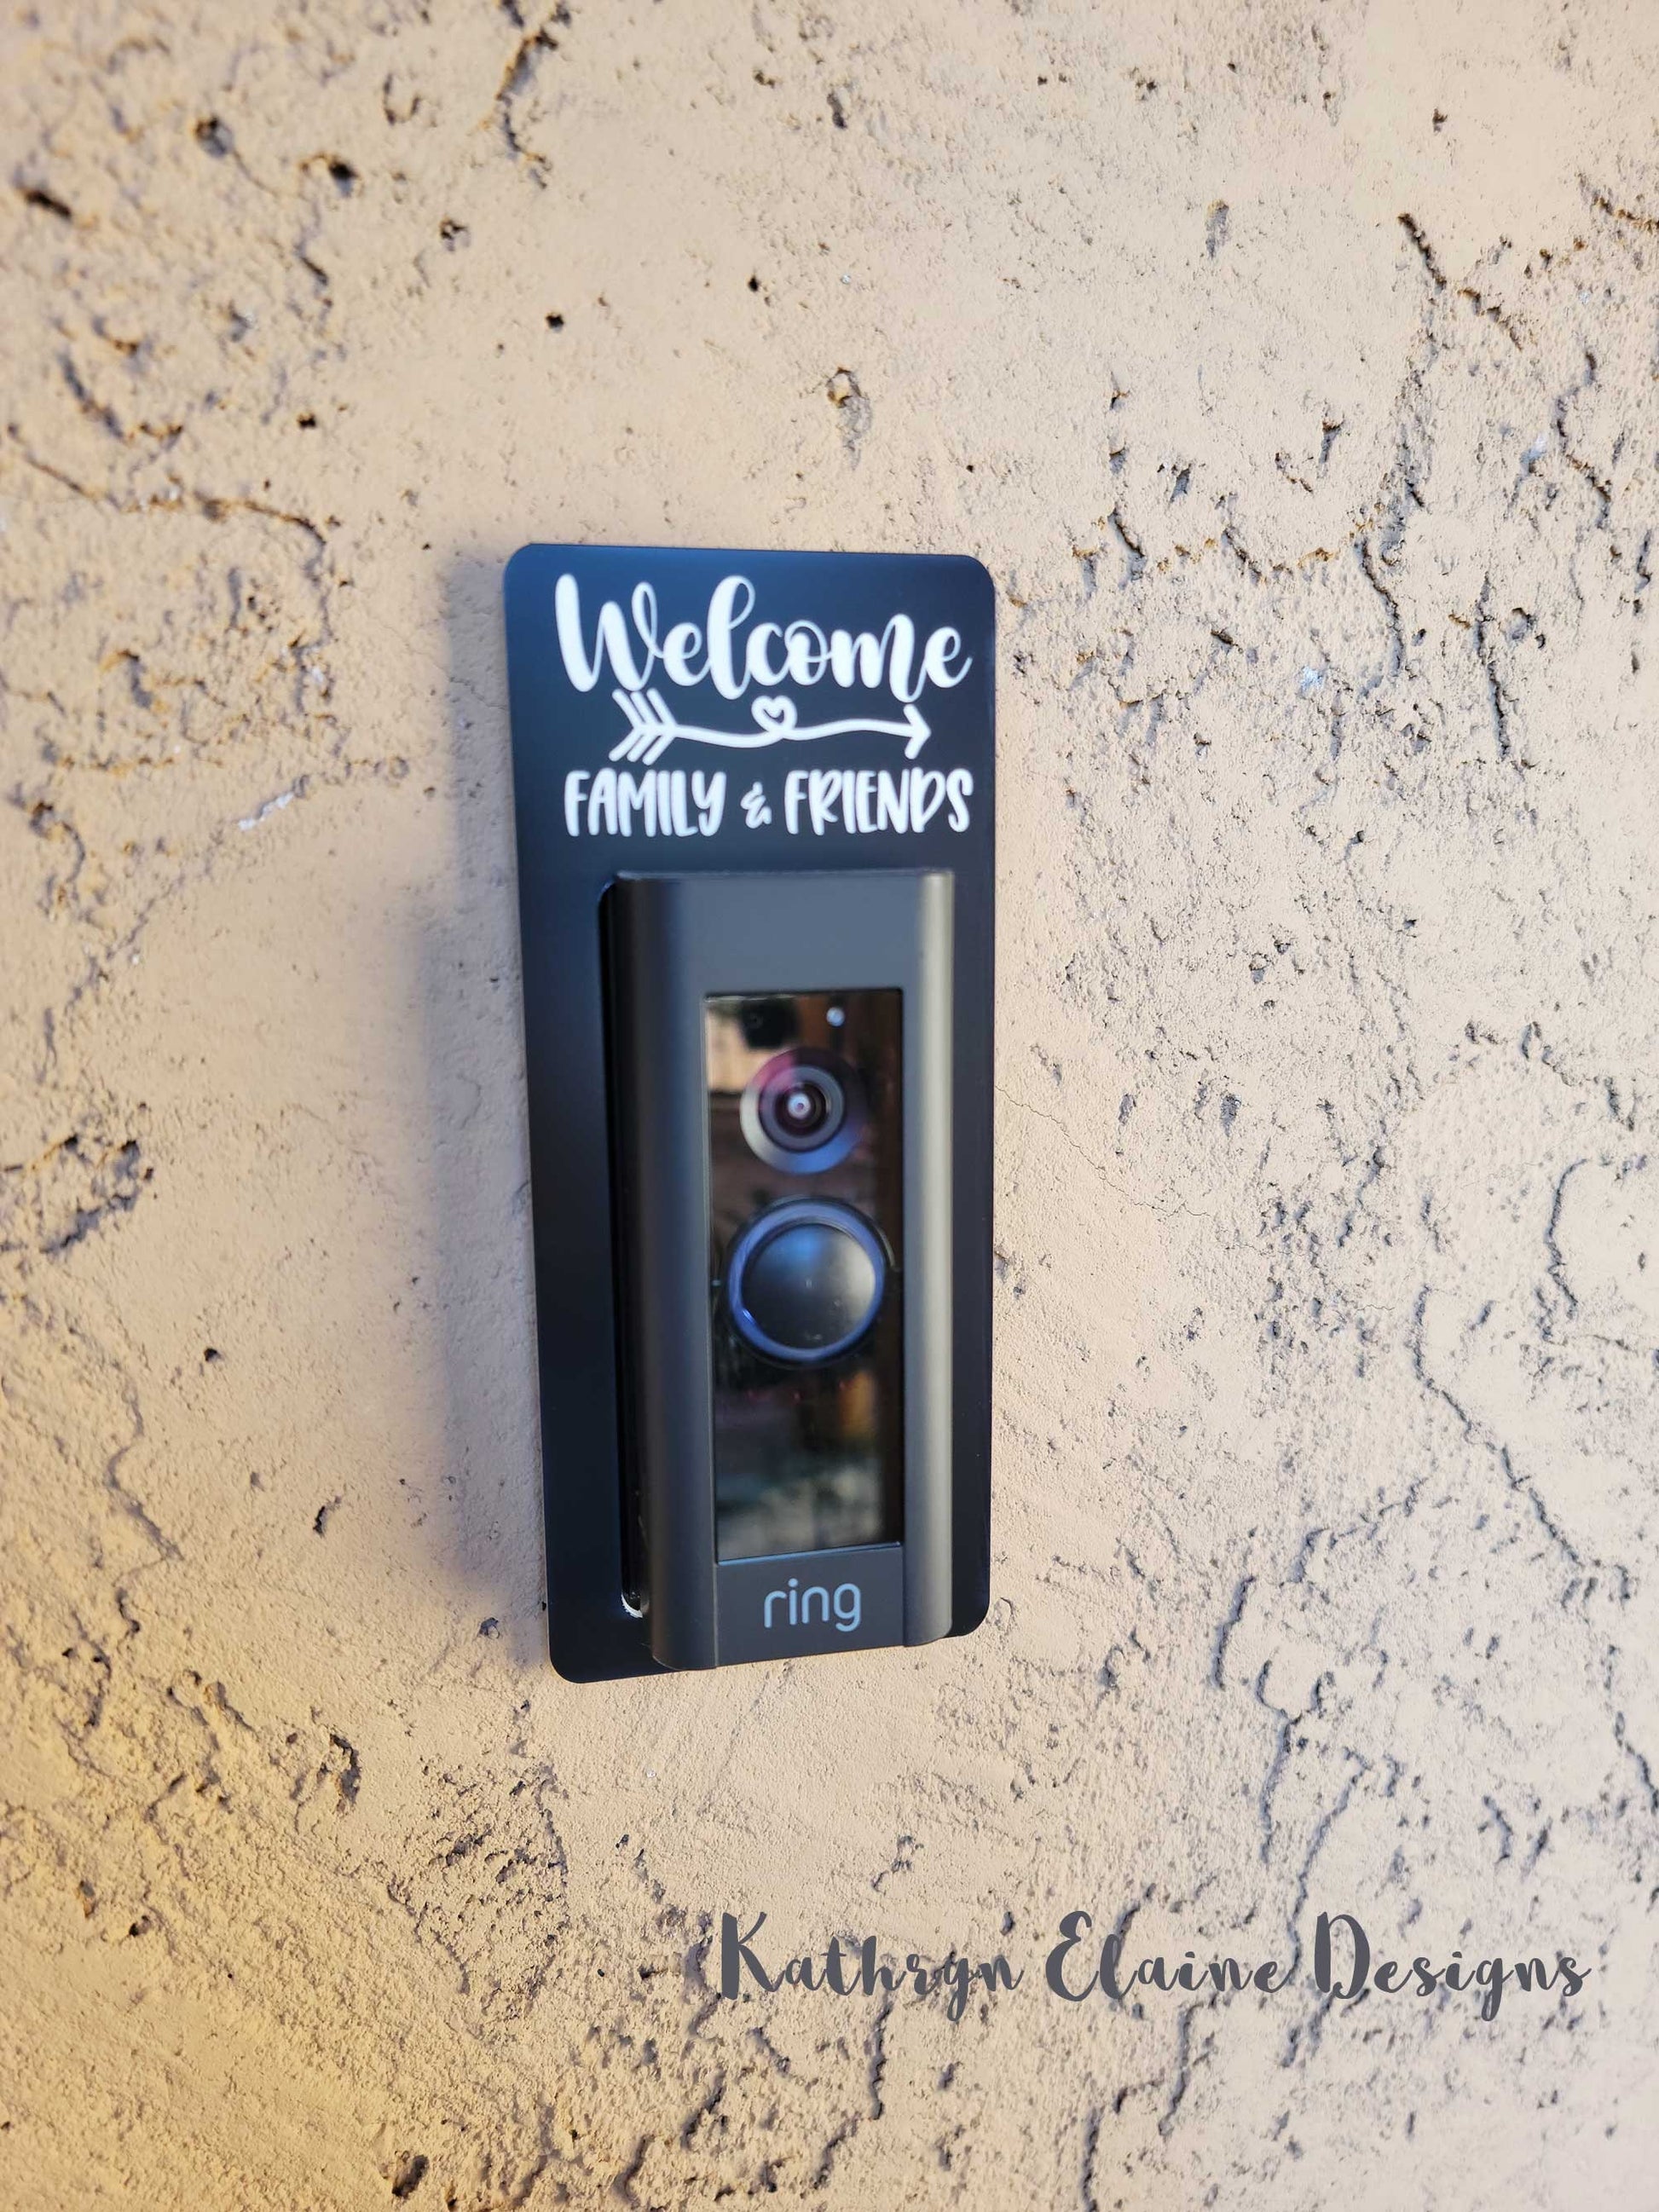 Black laminate doorbell surround with white lettering stating Welcome arrow design family and friends around Ring doorbell on tan background